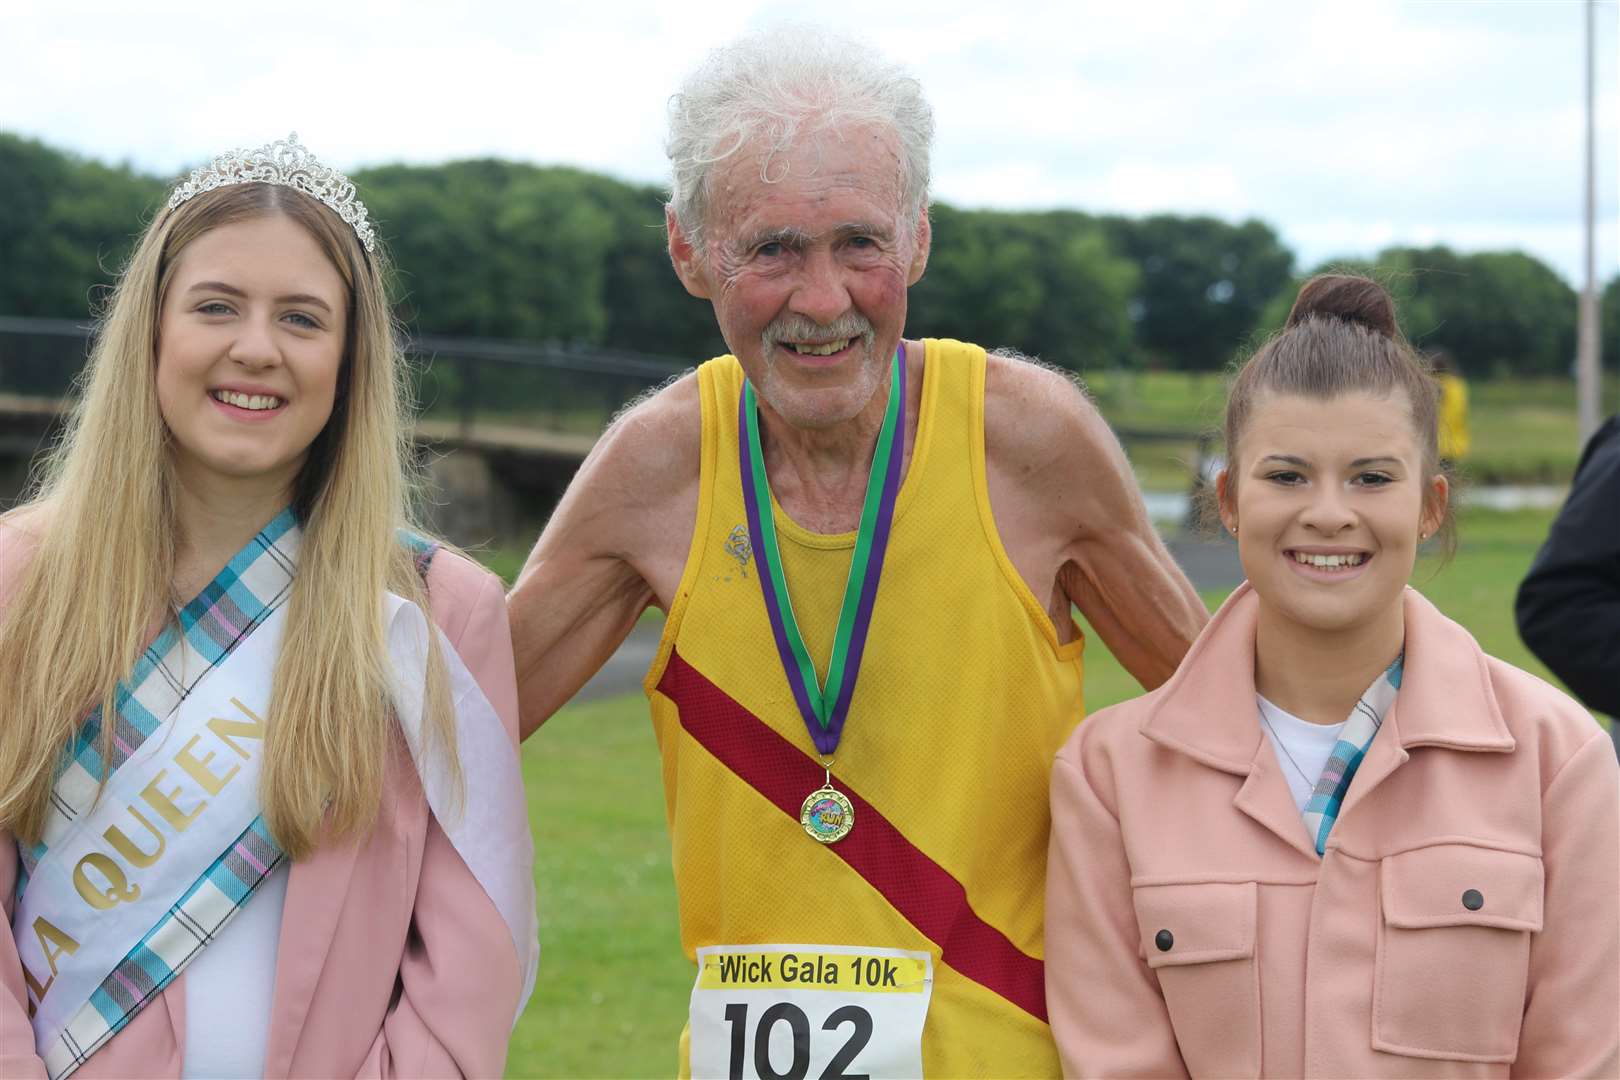 Gala queen Beth Dunnett (left) and attendant Lauryn Miller with 74-year-old Alex Sutherland who ran the 10k. Picture: Eswyl Fell